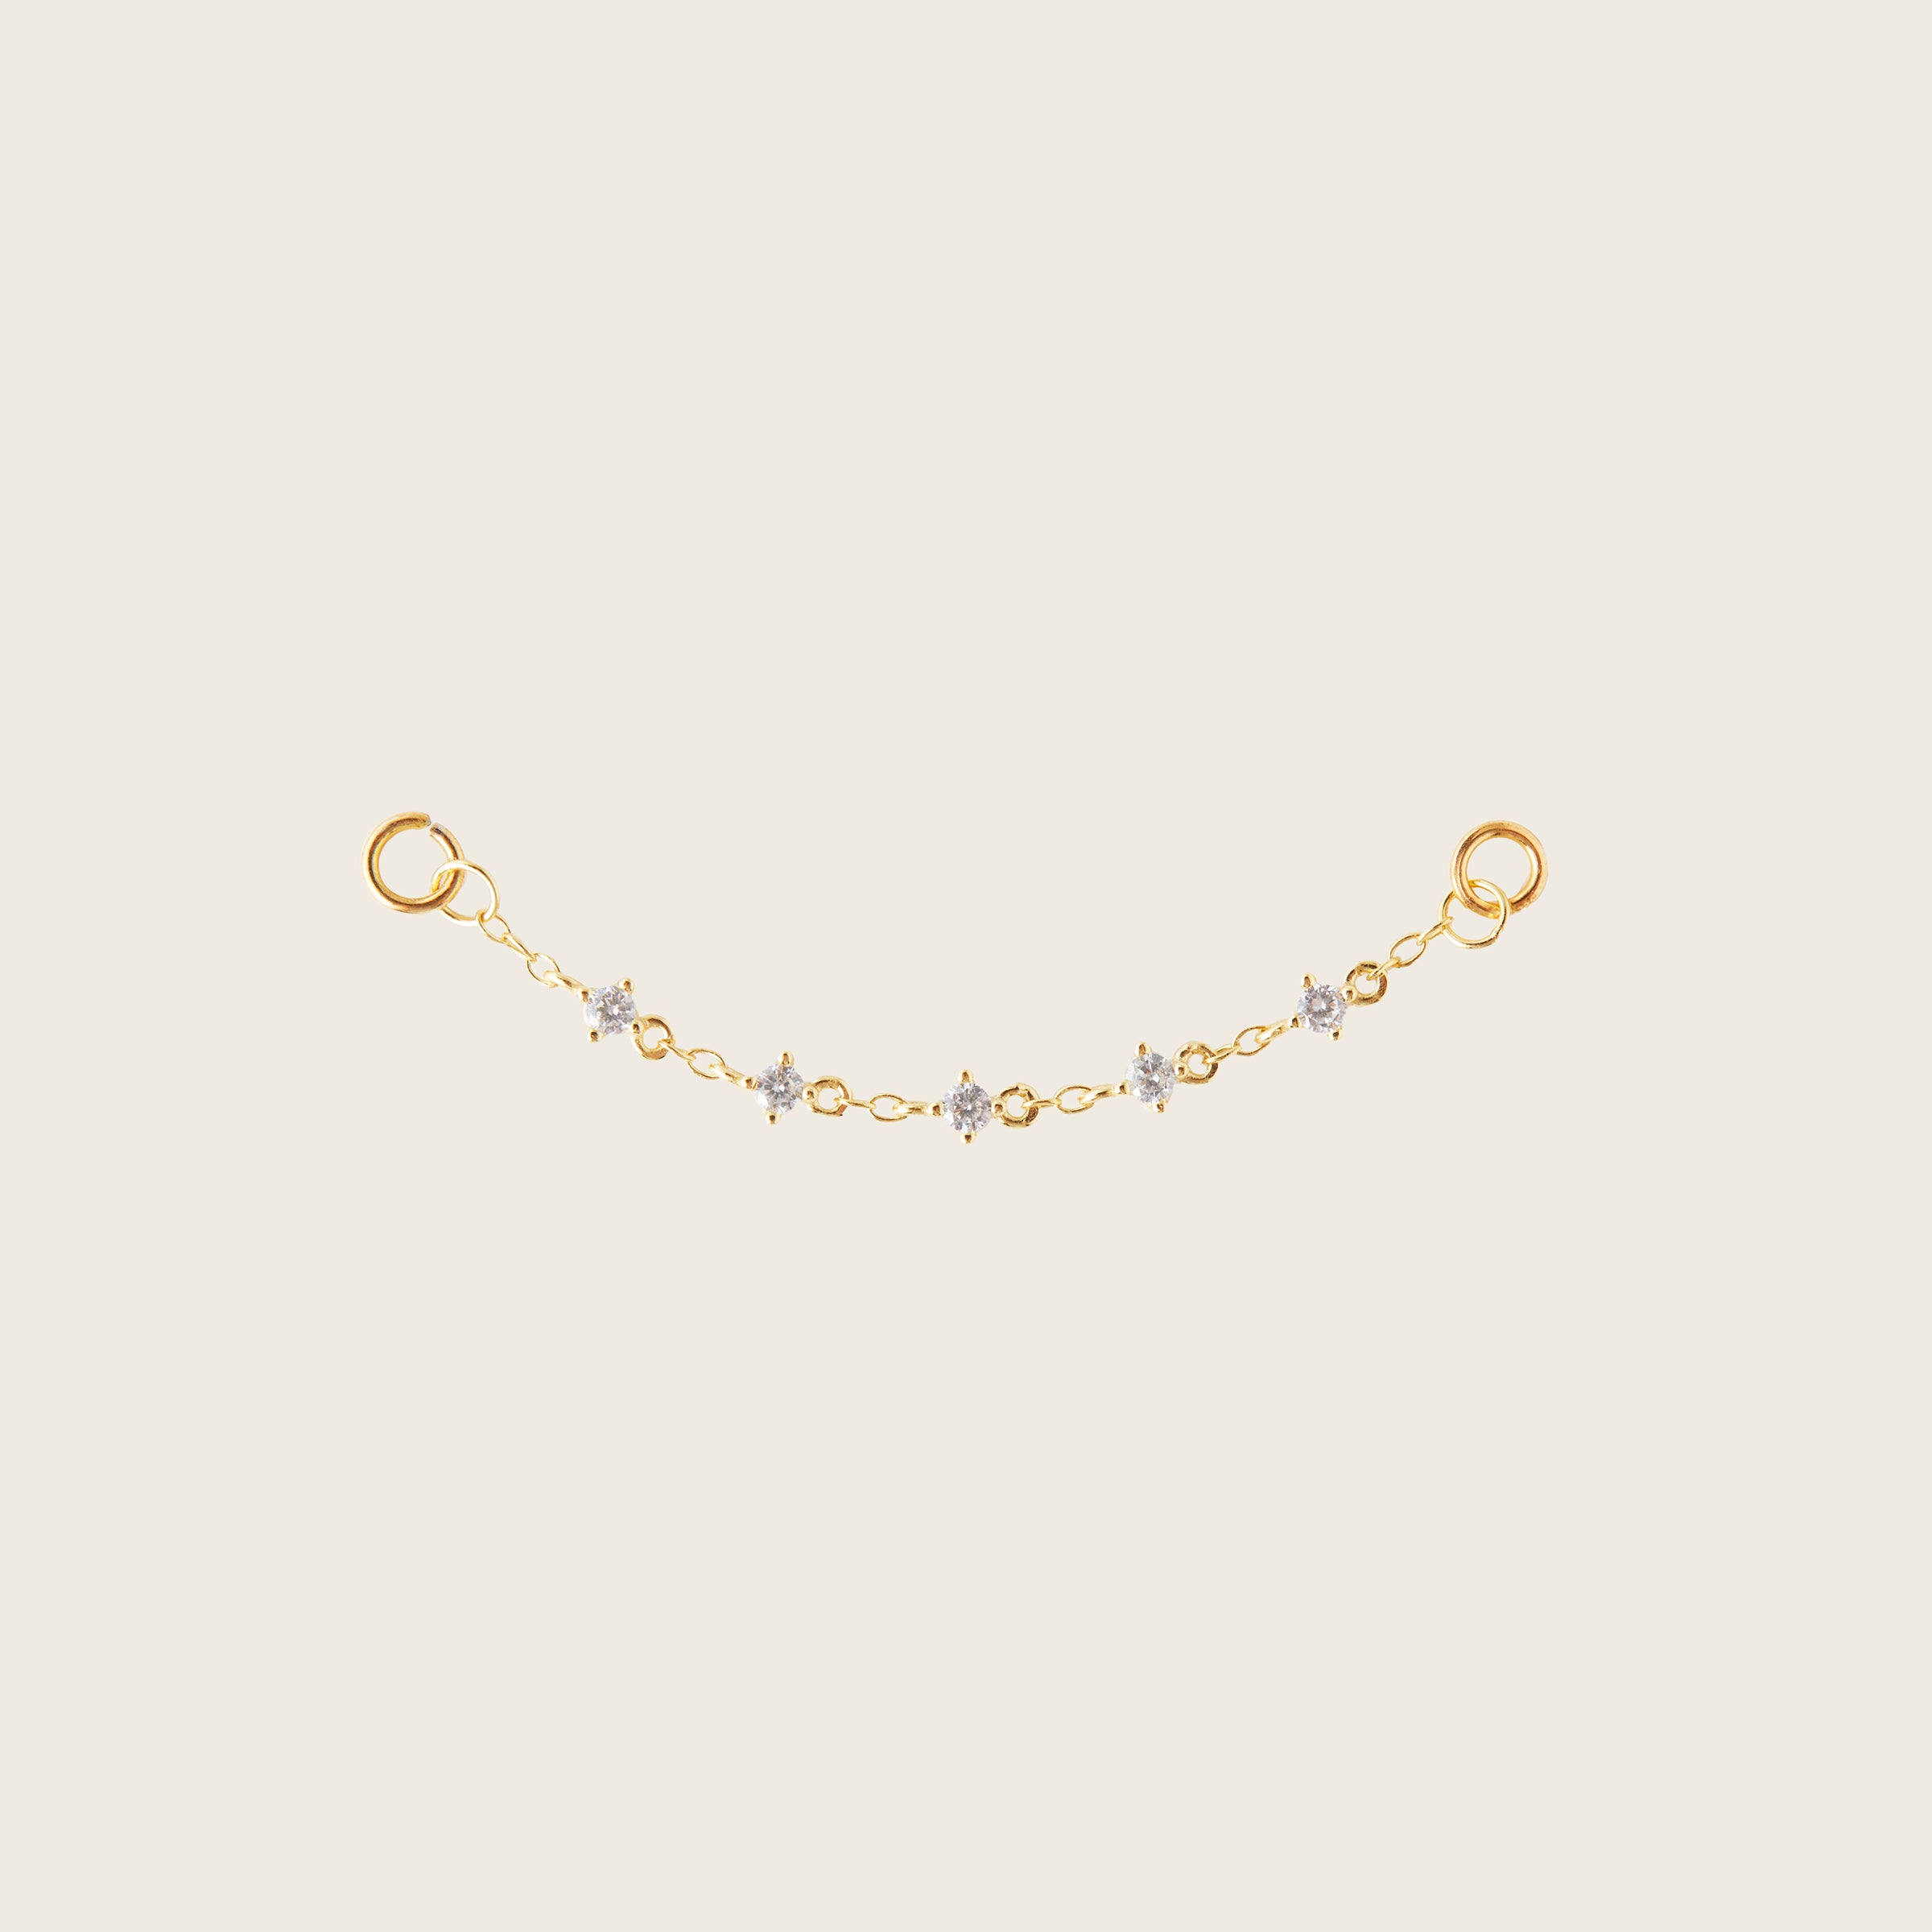 Image of the Single Cluster Hoop Chain are made with high-quality materials, including 18K gold plating over 925 Sterling Silver. These charms are both non-tarnish and water resistant. The perfect combination of style and durability.